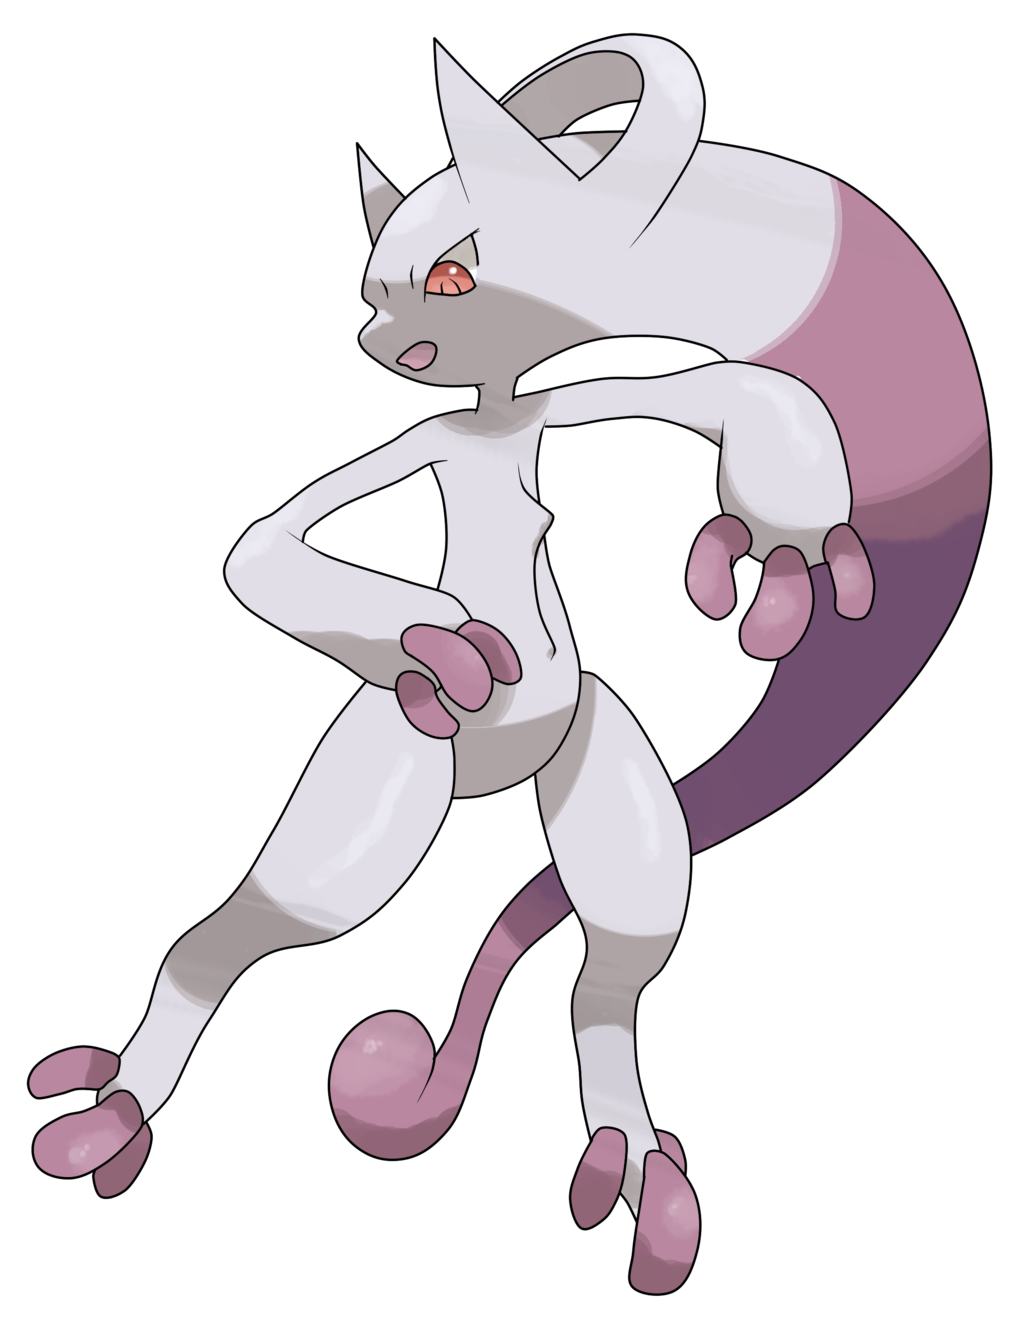 Find more Mega Mewtwo Y by TheAngryAron. 